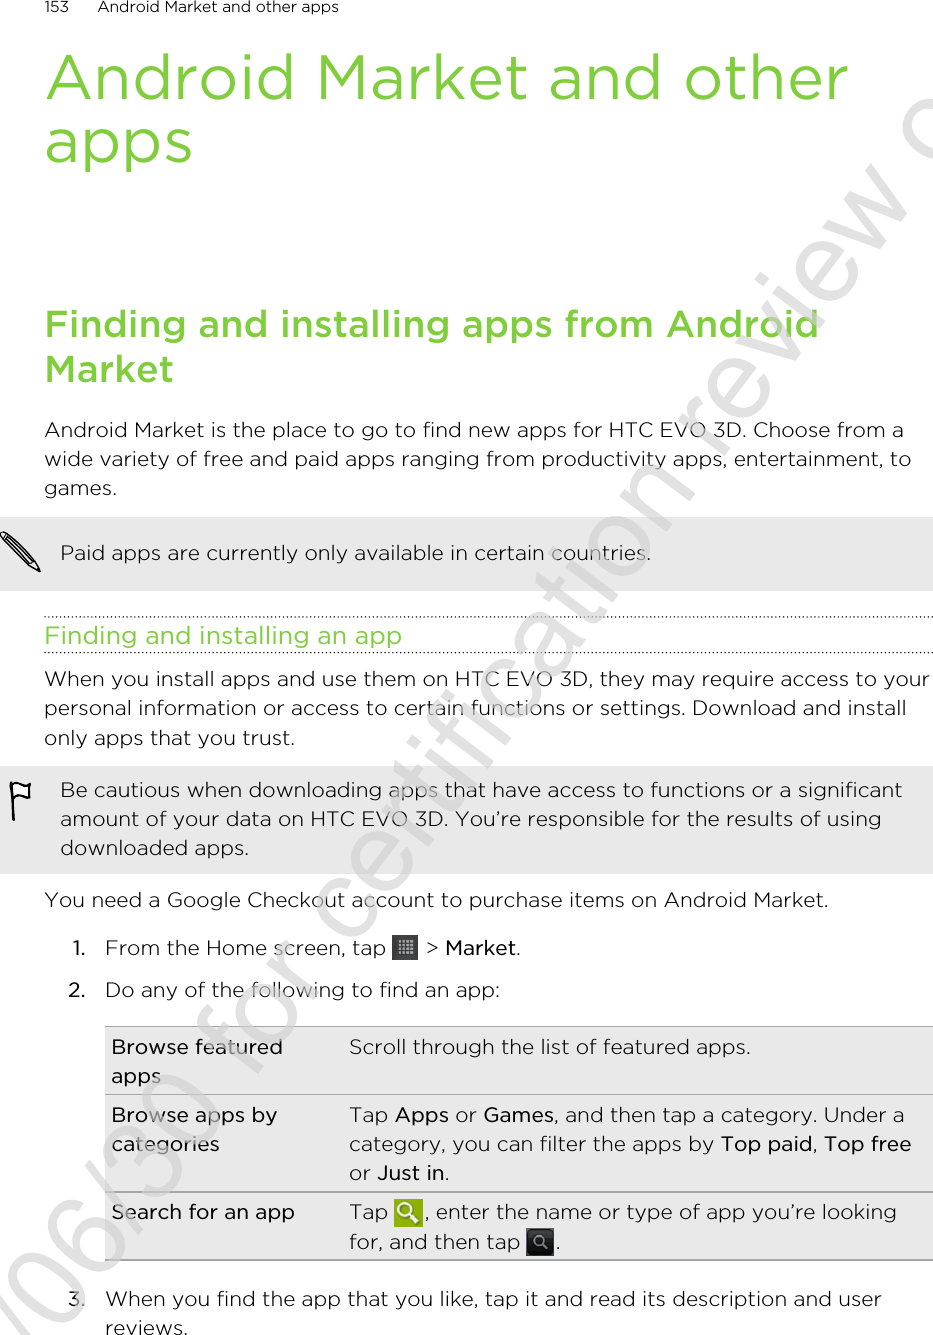 Android Market and otherappsFinding and installing apps from AndroidMarketAndroid Market is the place to go to find new apps for HTC EVO 3D. Choose from awide variety of free and paid apps ranging from productivity apps, entertainment, togames.Paid apps are currently only available in certain countries.Finding and installing an appWhen you install apps and use them on HTC EVO 3D, they may require access to yourpersonal information or access to certain functions or settings. Download and installonly apps that you trust.Be cautious when downloading apps that have access to functions or a significantamount of your data on HTC EVO 3D. You’re responsible for the results of usingdownloaded apps.You need a Google Checkout account to purchase items on Android Market.1. From the Home screen, tap   &gt; Market.2. Do any of the following to find an app:Browse featuredappsScroll through the list of featured apps.Browse apps bycategoriesTap Apps or Games, and then tap a category. Under acategory, you can filter the apps by Top paid, Top freeor Just in.Search for an app Tap  , enter the name or type of app you’re lookingfor, and then tap  .3. When you find the app that you like, tap it and read its description and userreviews.153 Android Market and other apps2011/06/30 for certification review only